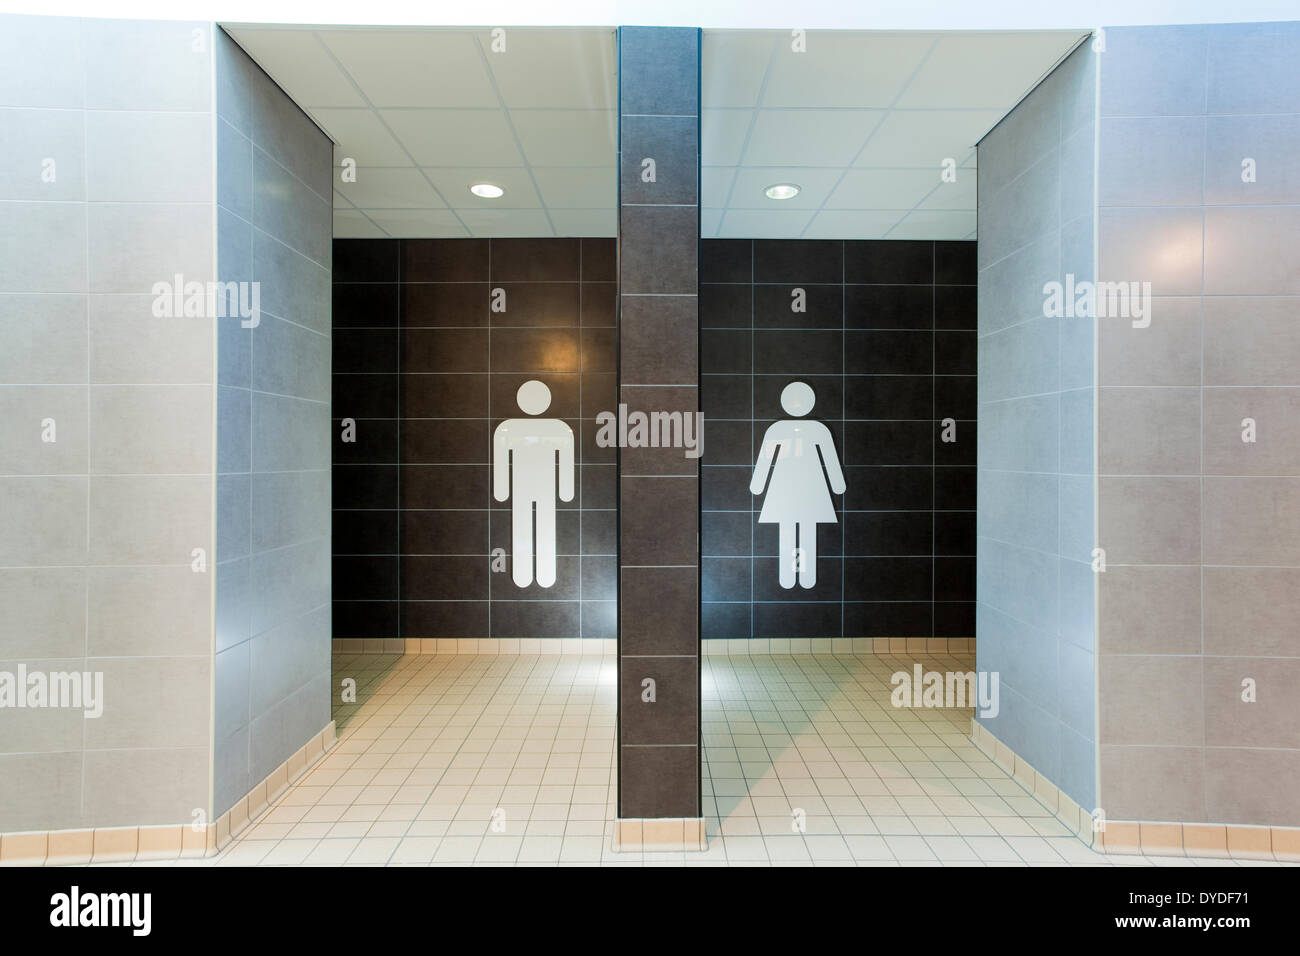 Male and female icons at changing rooms entrance. Stock Photo